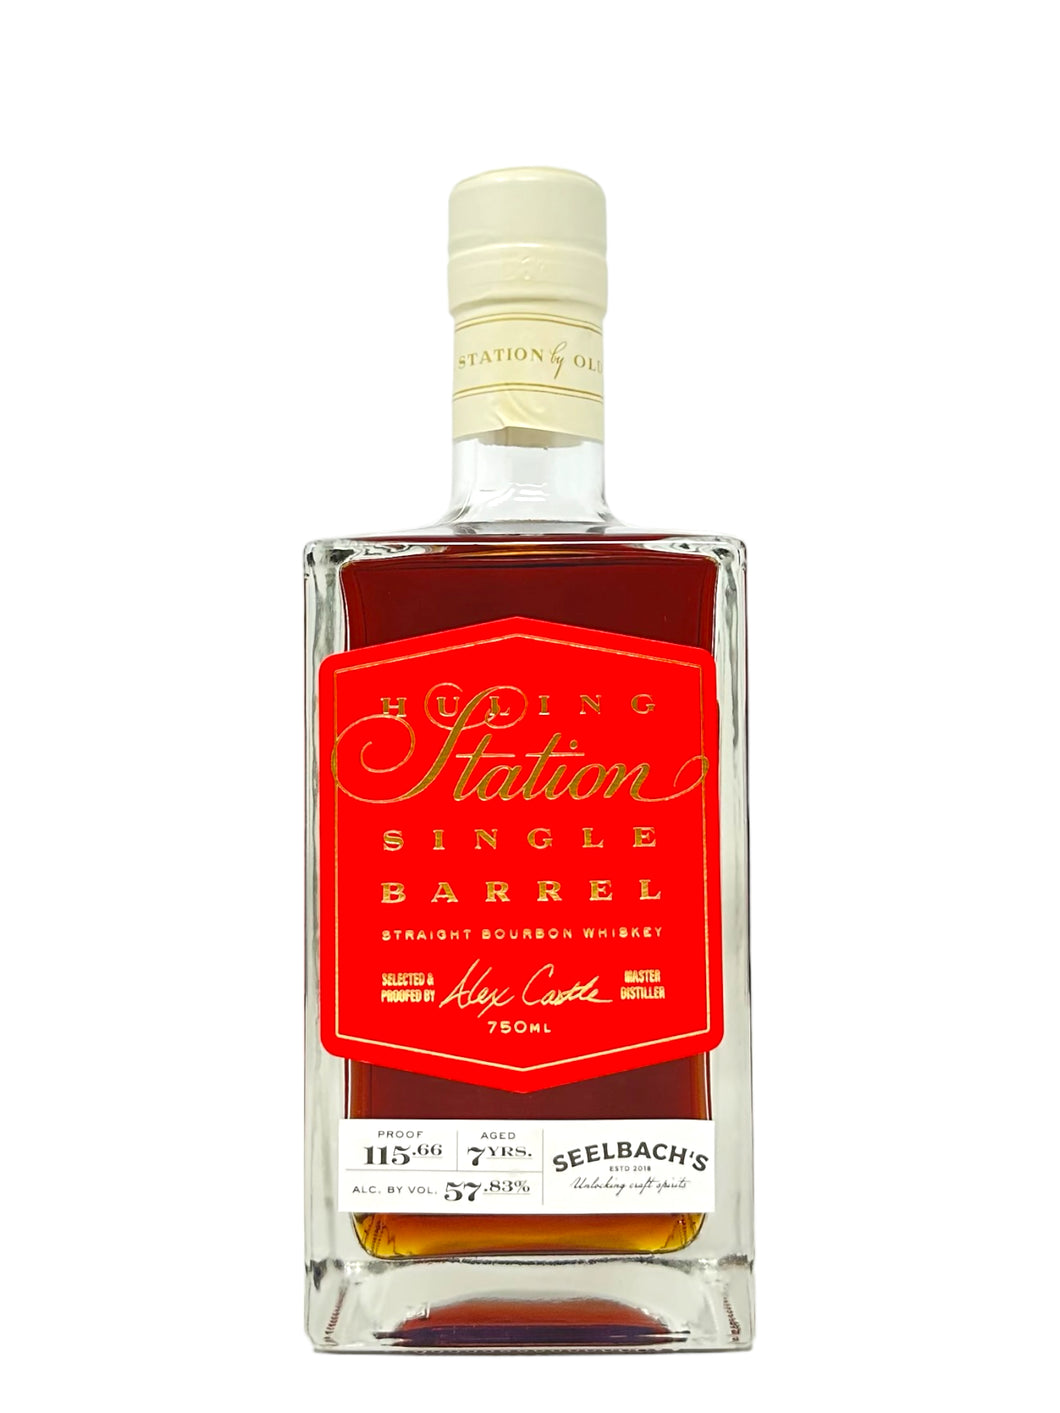 Old Dominick Huling Station Single Barrel Bourbon #1590 115.66 proof - Selected by Seelbach's